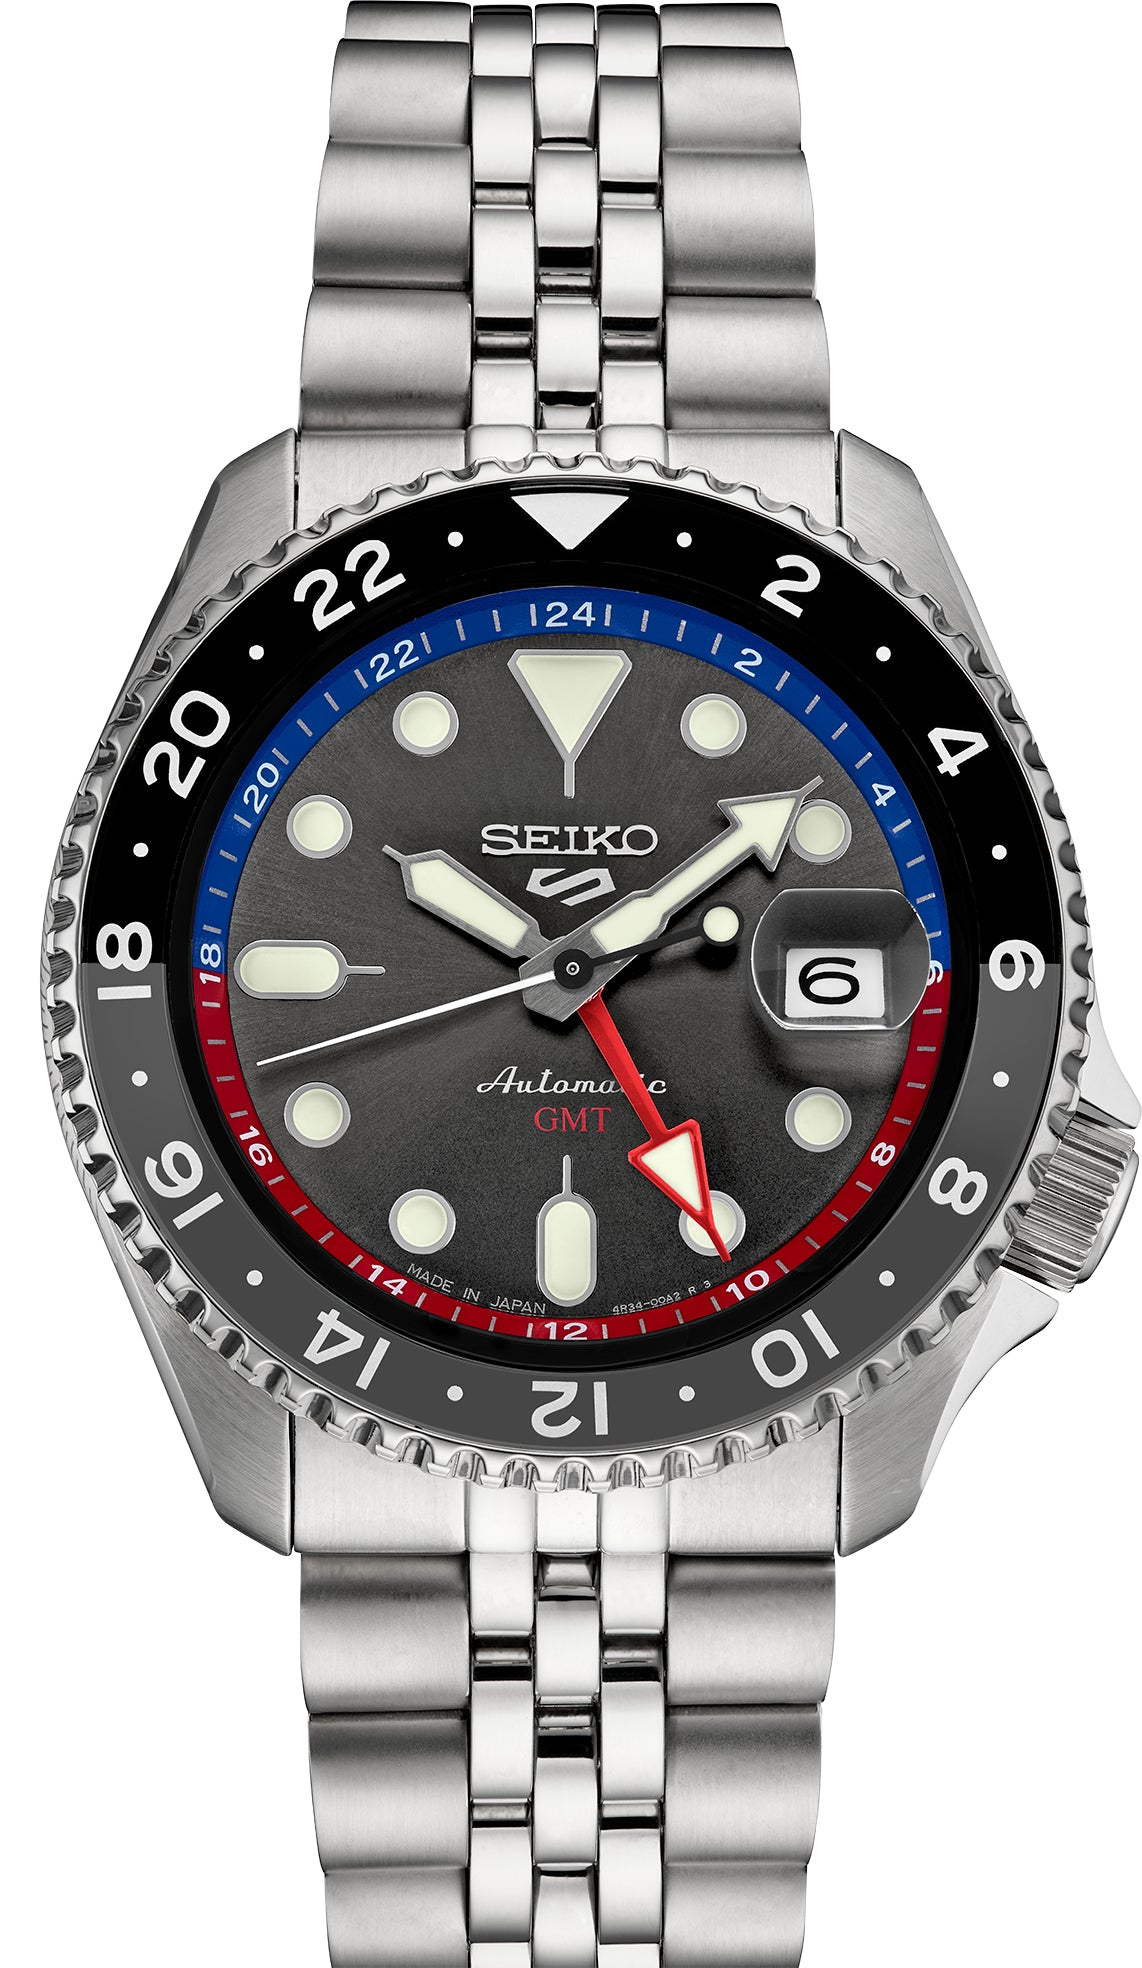 Gents Seiko Automatic GMT Watch